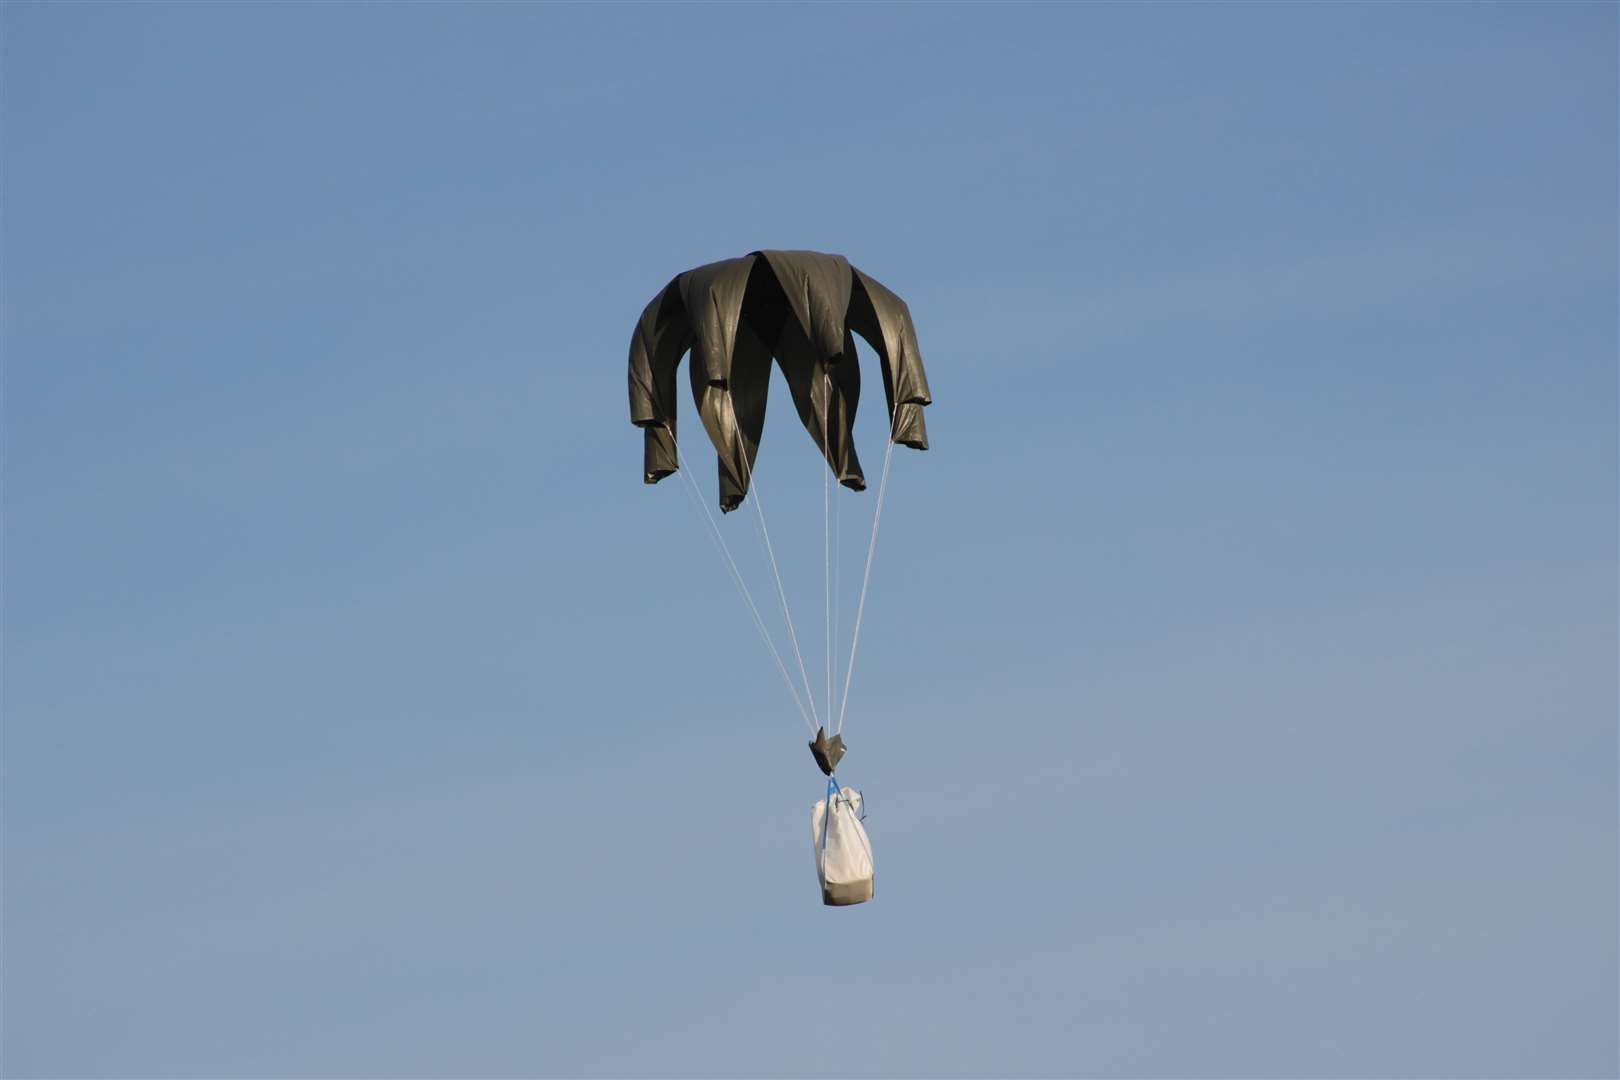 Air Drop Box packages are dropped from a plane by parachute during testing at Headcorn Aerodrome